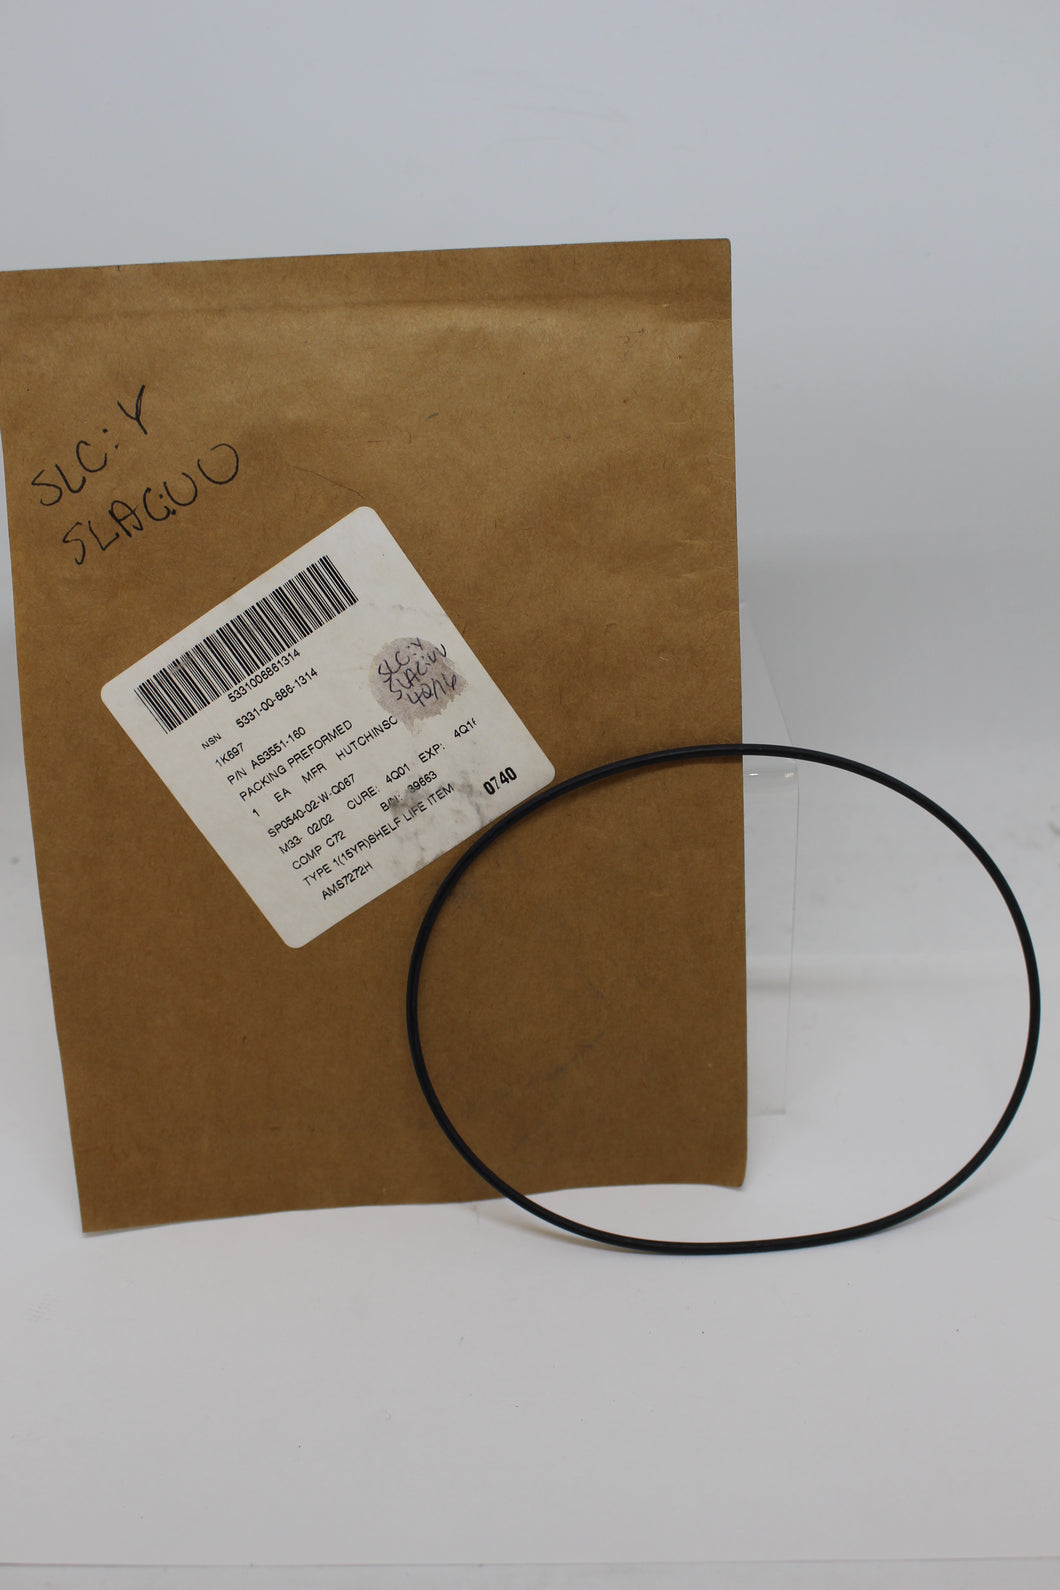 O-Ring, 5331-00-686-1314, P/N AS3551-160, New